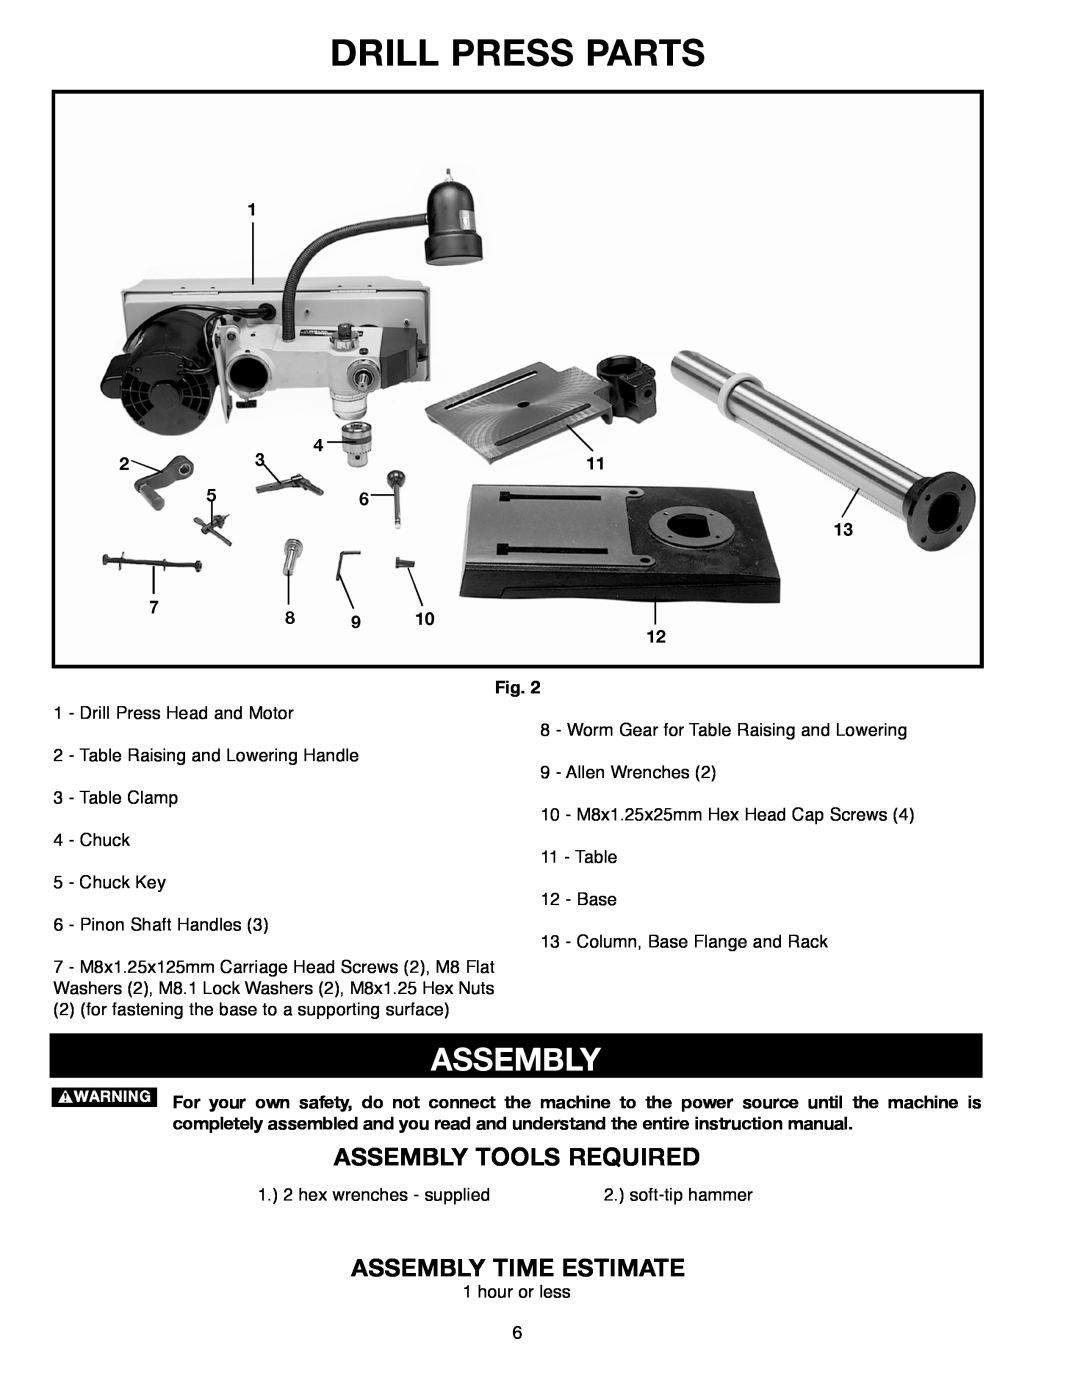 Delta SM300, 638517-00 warranty Drill Press Parts, A S S E M B Ly, Assembly Tools Required, Assembly Time Estimate 